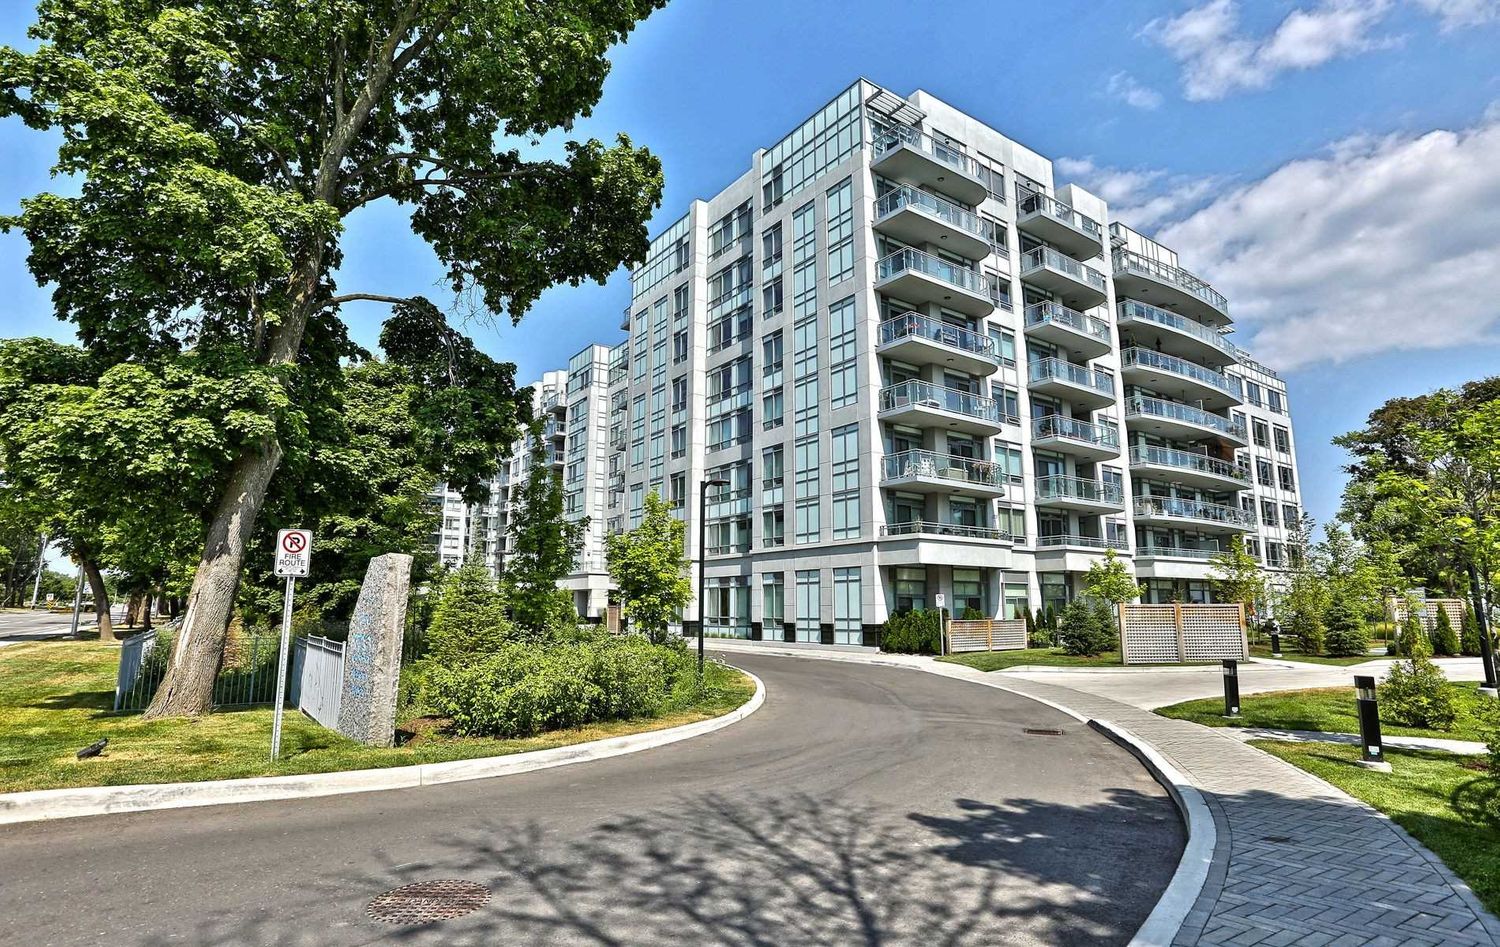 3500 Lakeshore Road W. Bluwater Condos is located in  Oakville, Toronto - image #1 of 3